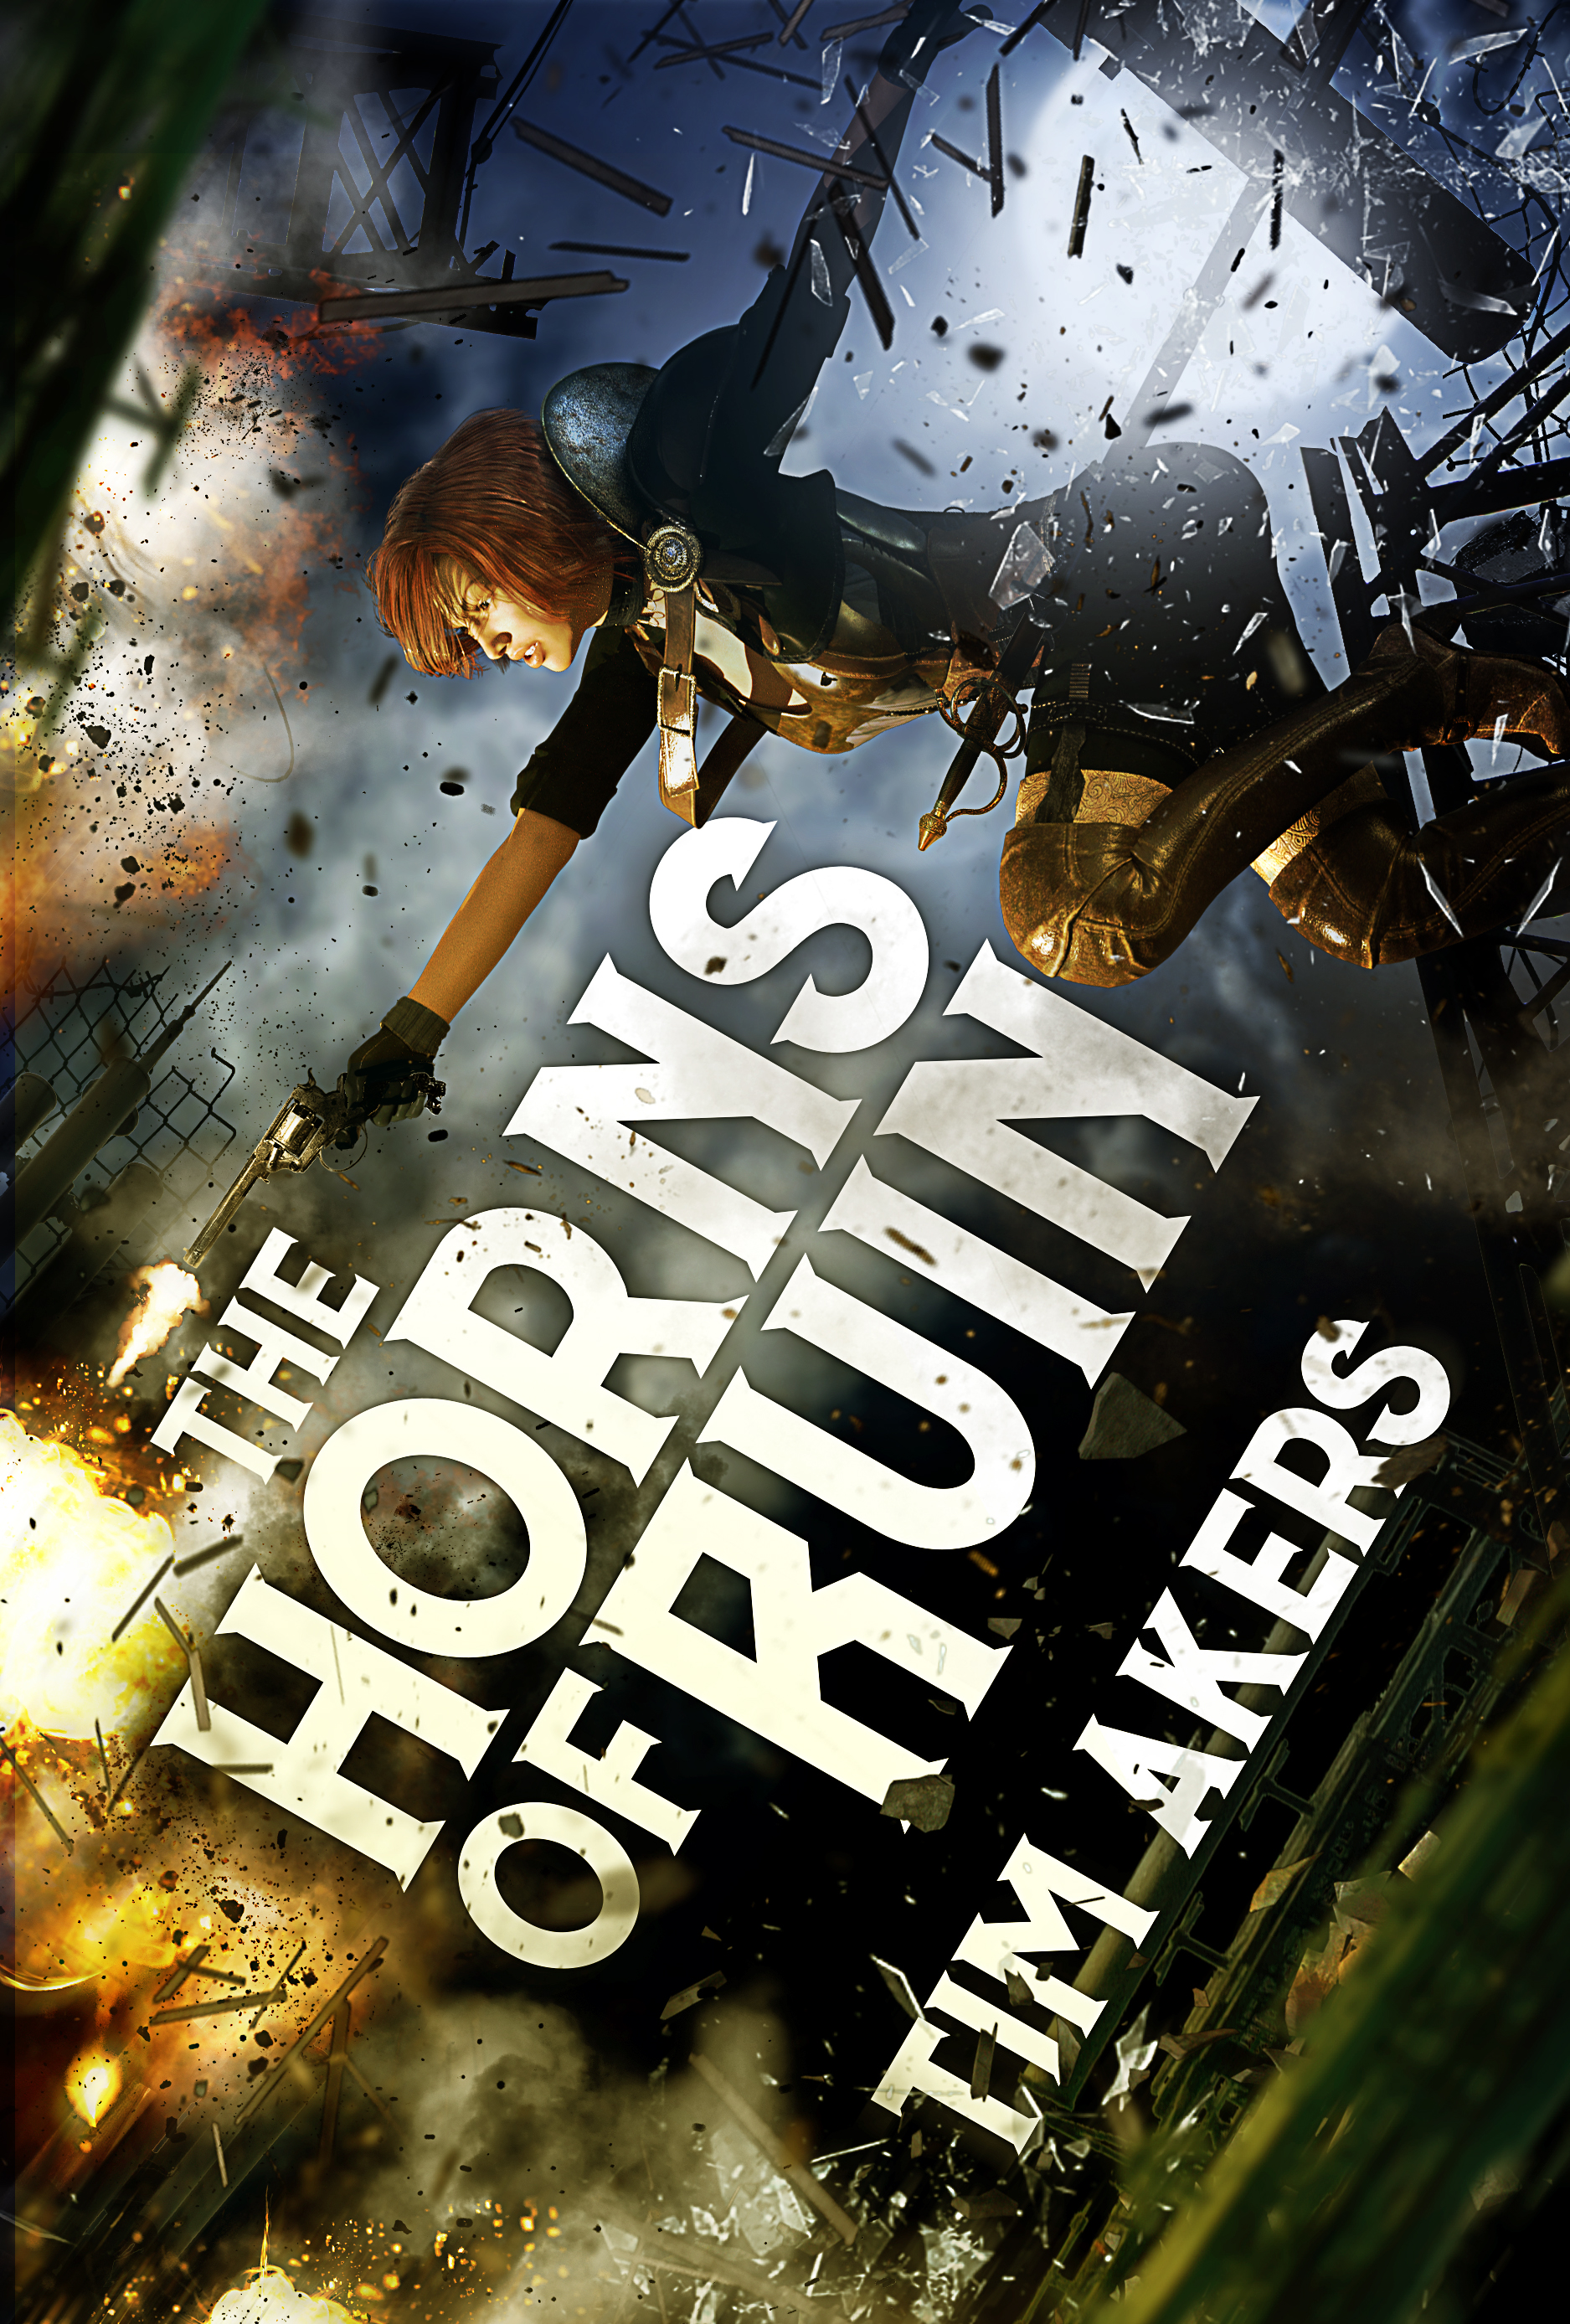 The horns of ruin (2010, Pyr)